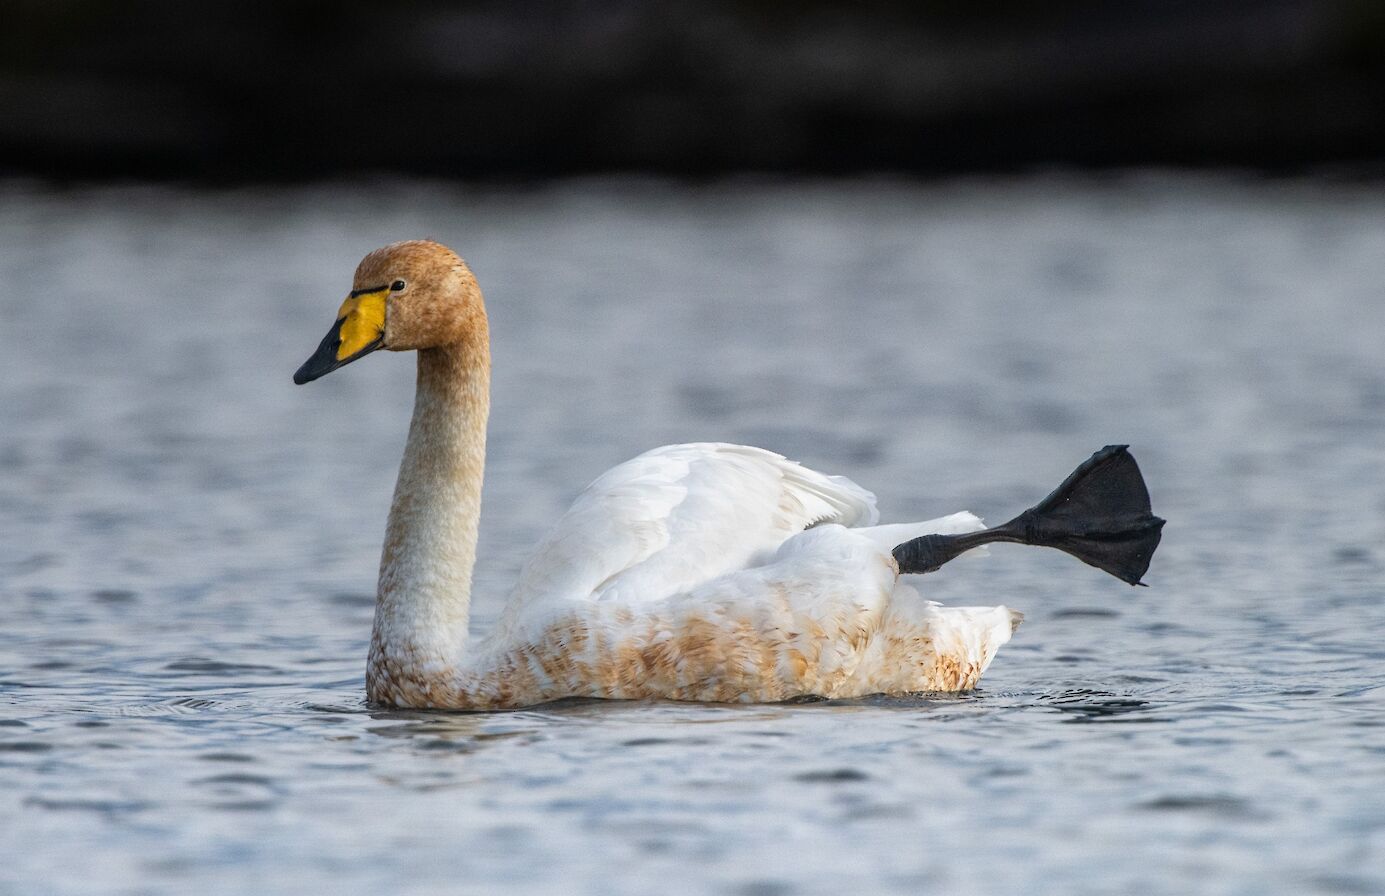 Whooper swan in Orkney - image by Raymond Besant